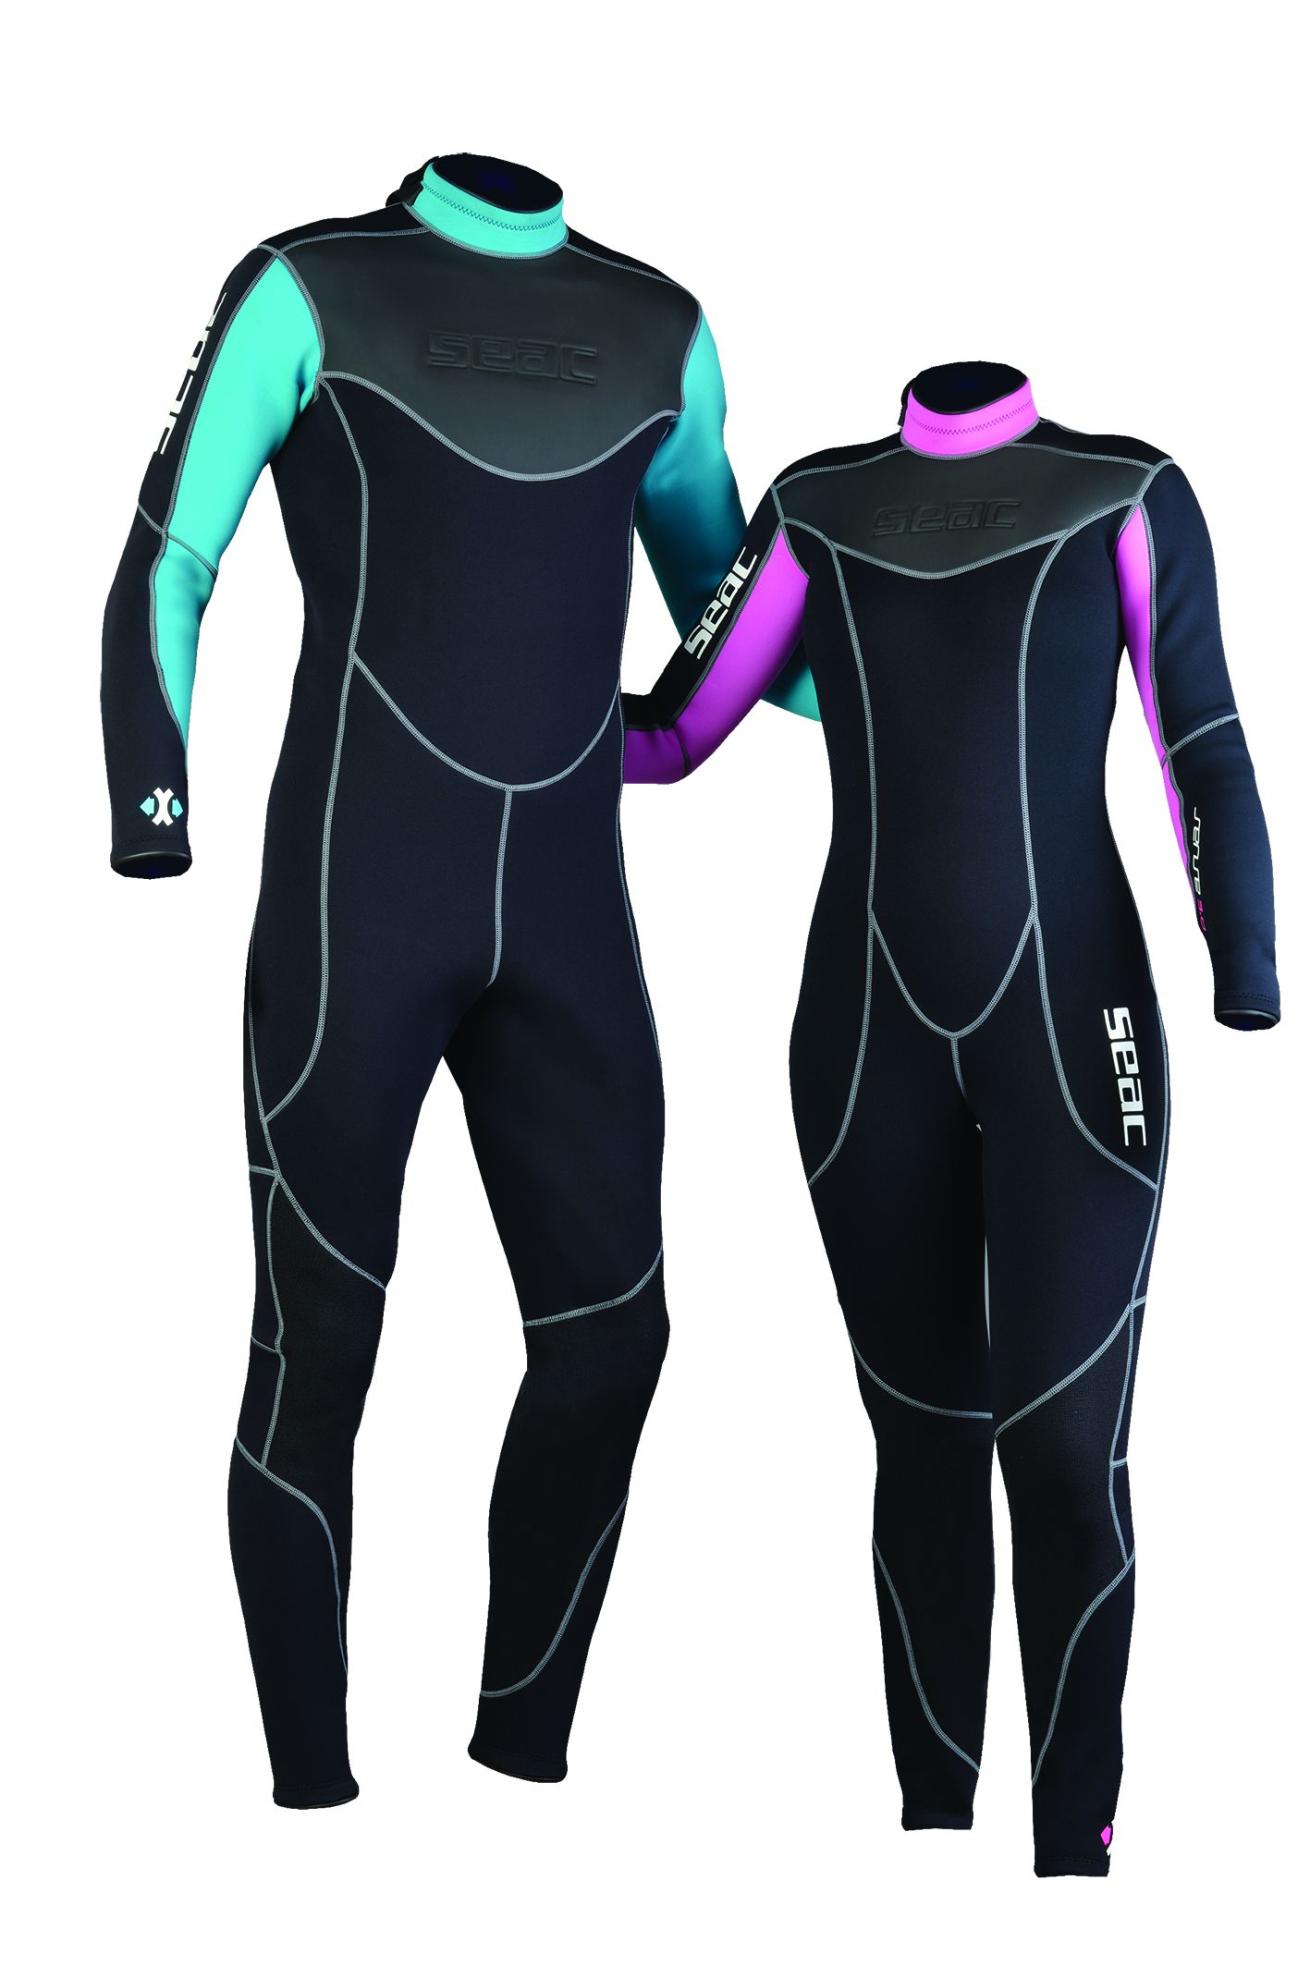 Outstanding fit, warmth and stretch in a 3mm warm water suit